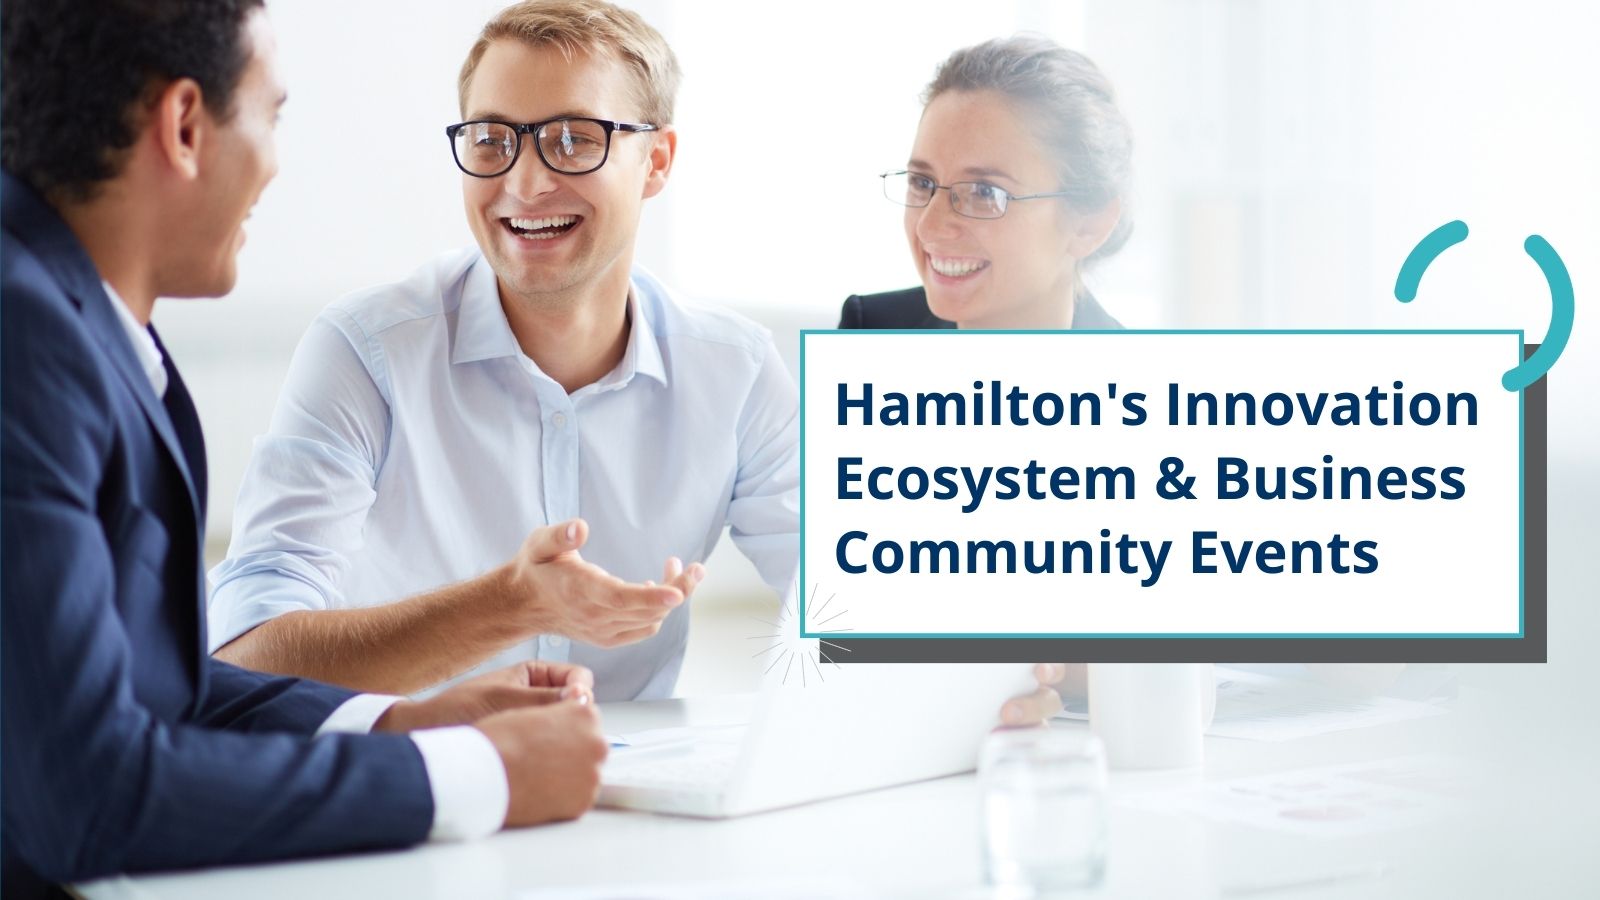 Hamilton's Innovation Ecosystem and Business Community Events